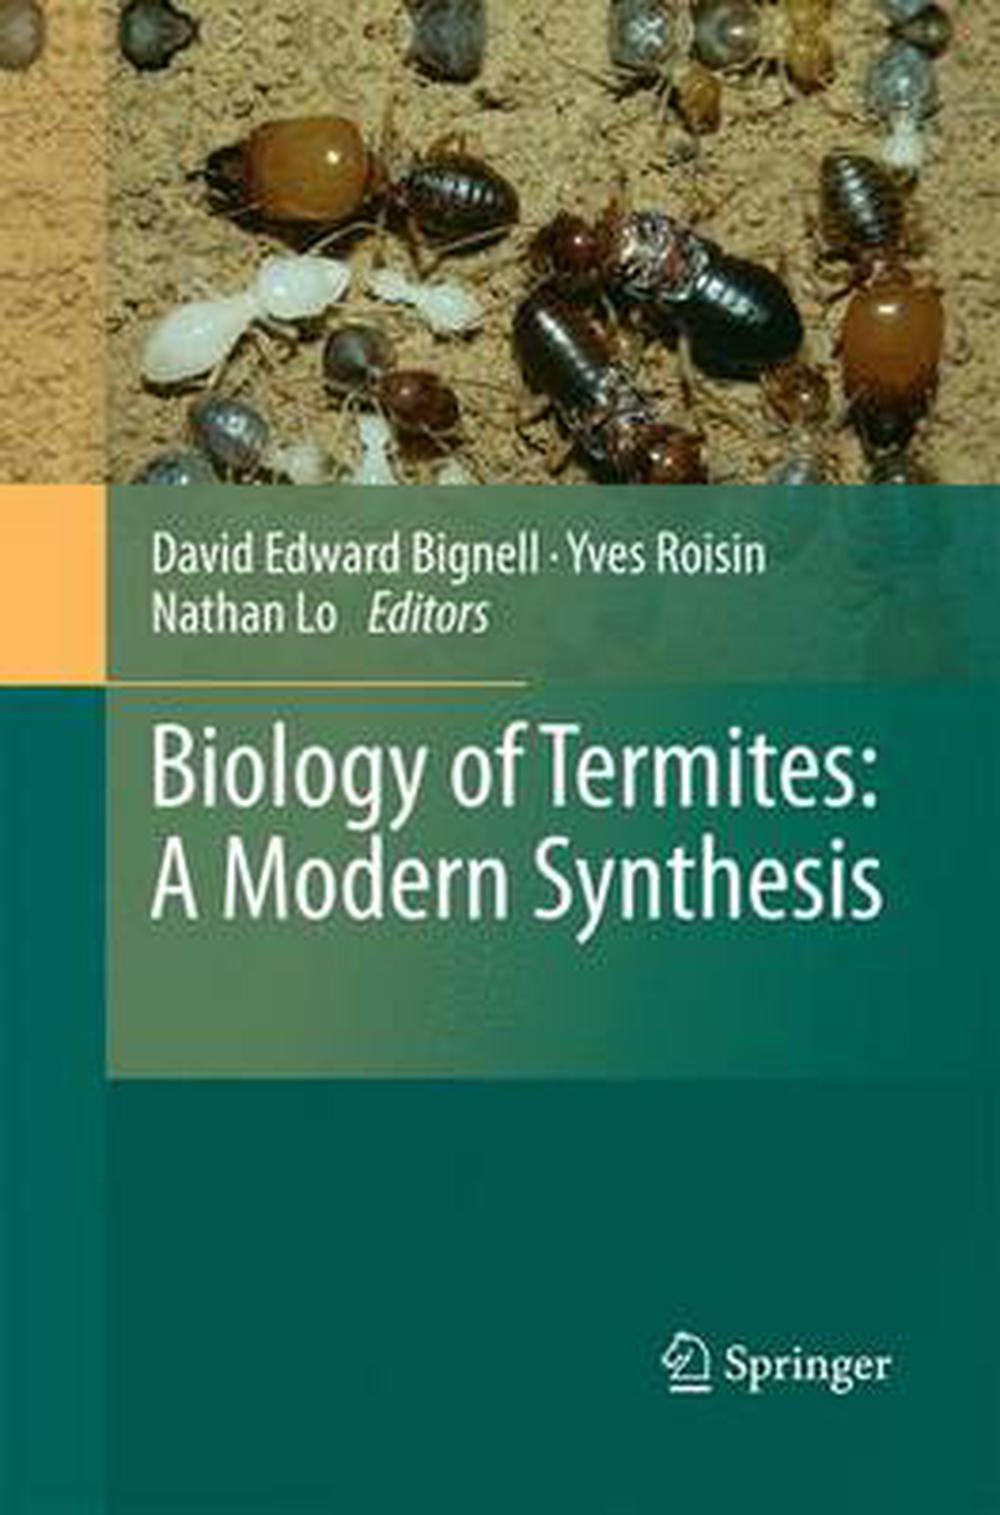 Biology of Termites a Modern Synthesis (English) Paperback Book Free